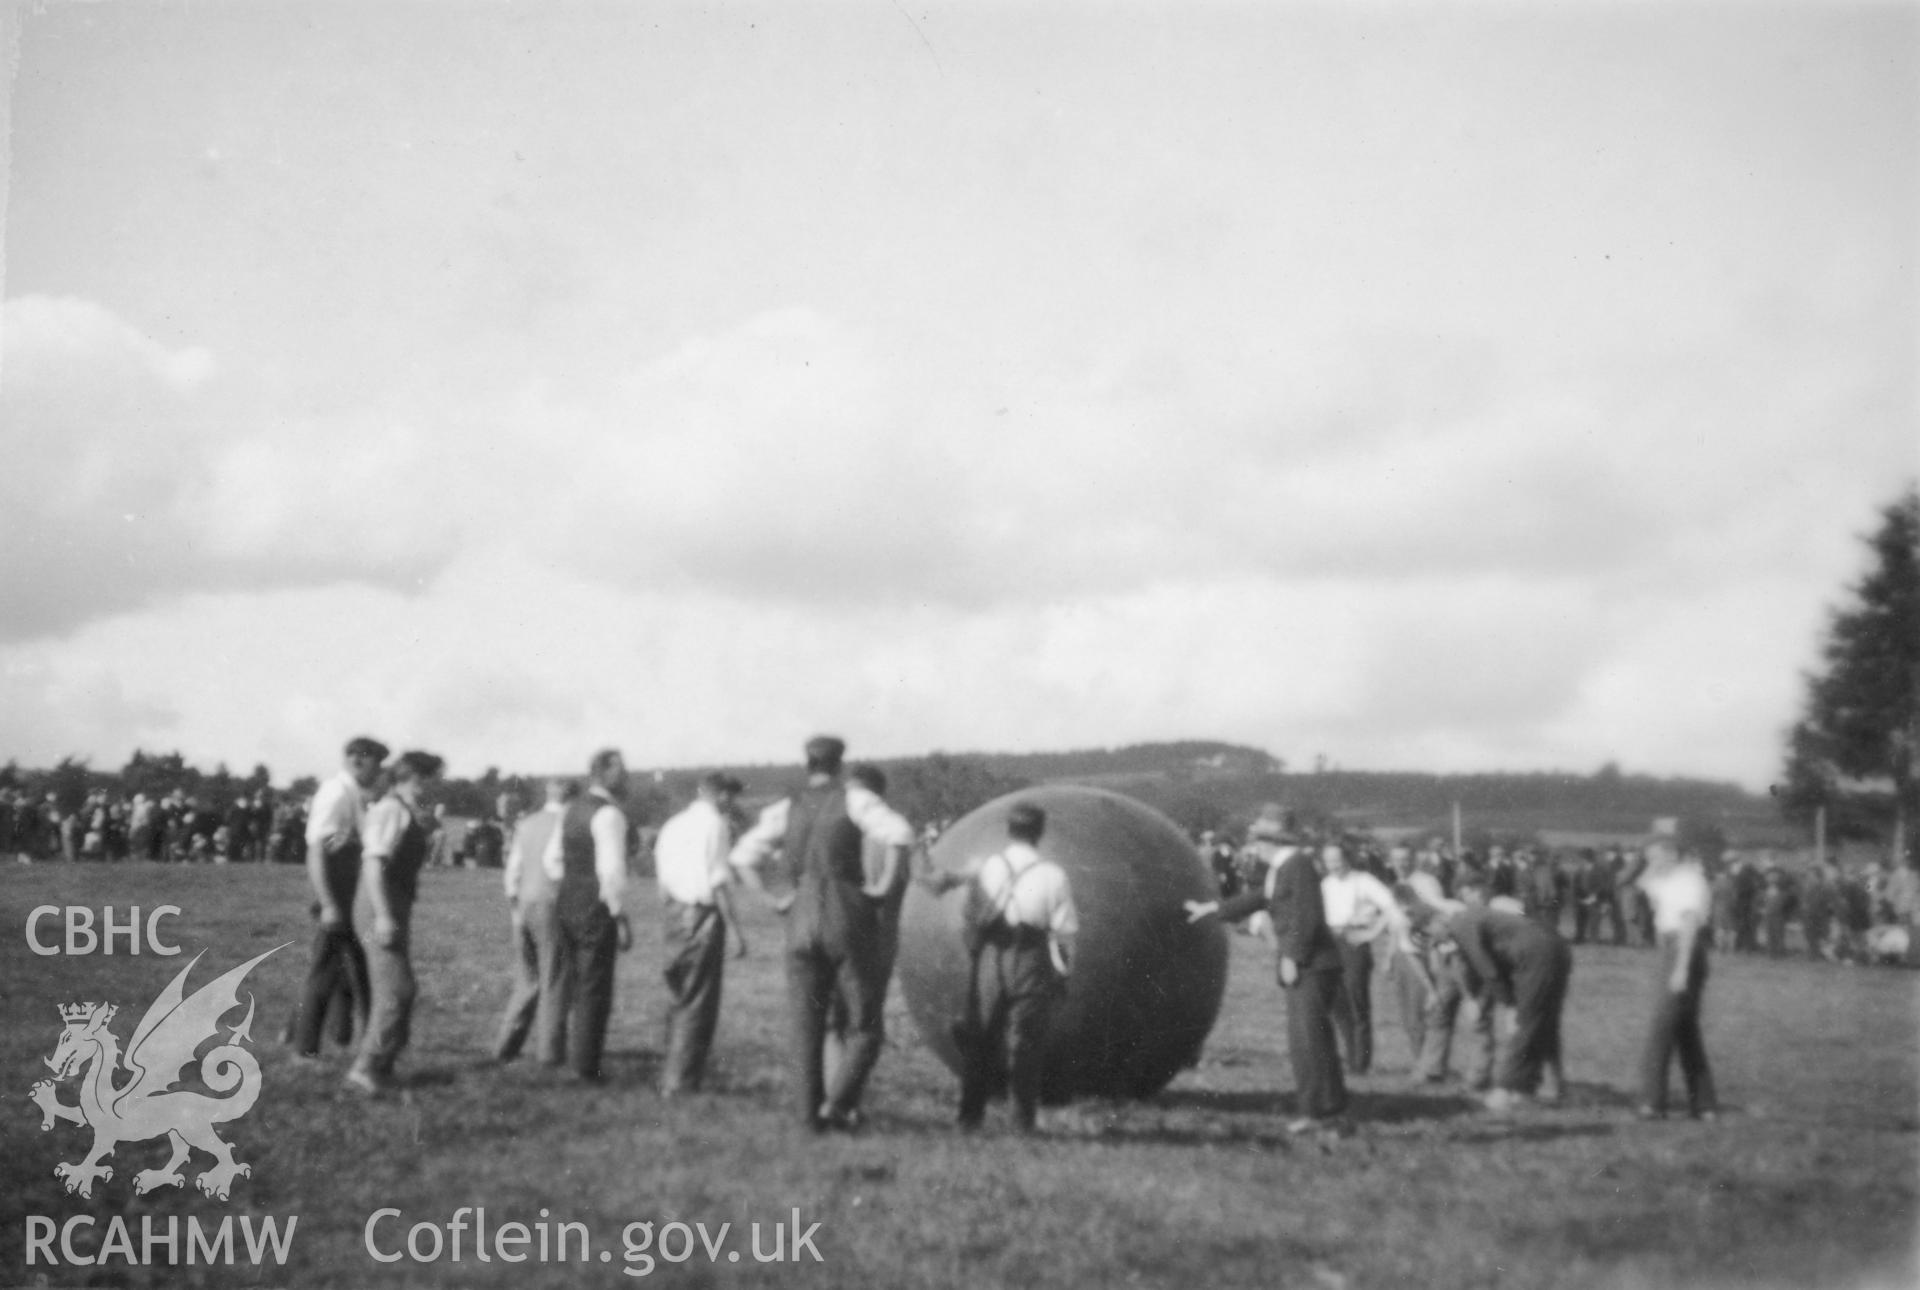 Black and white photograph showing a game of push ball in progress at Rhayader.